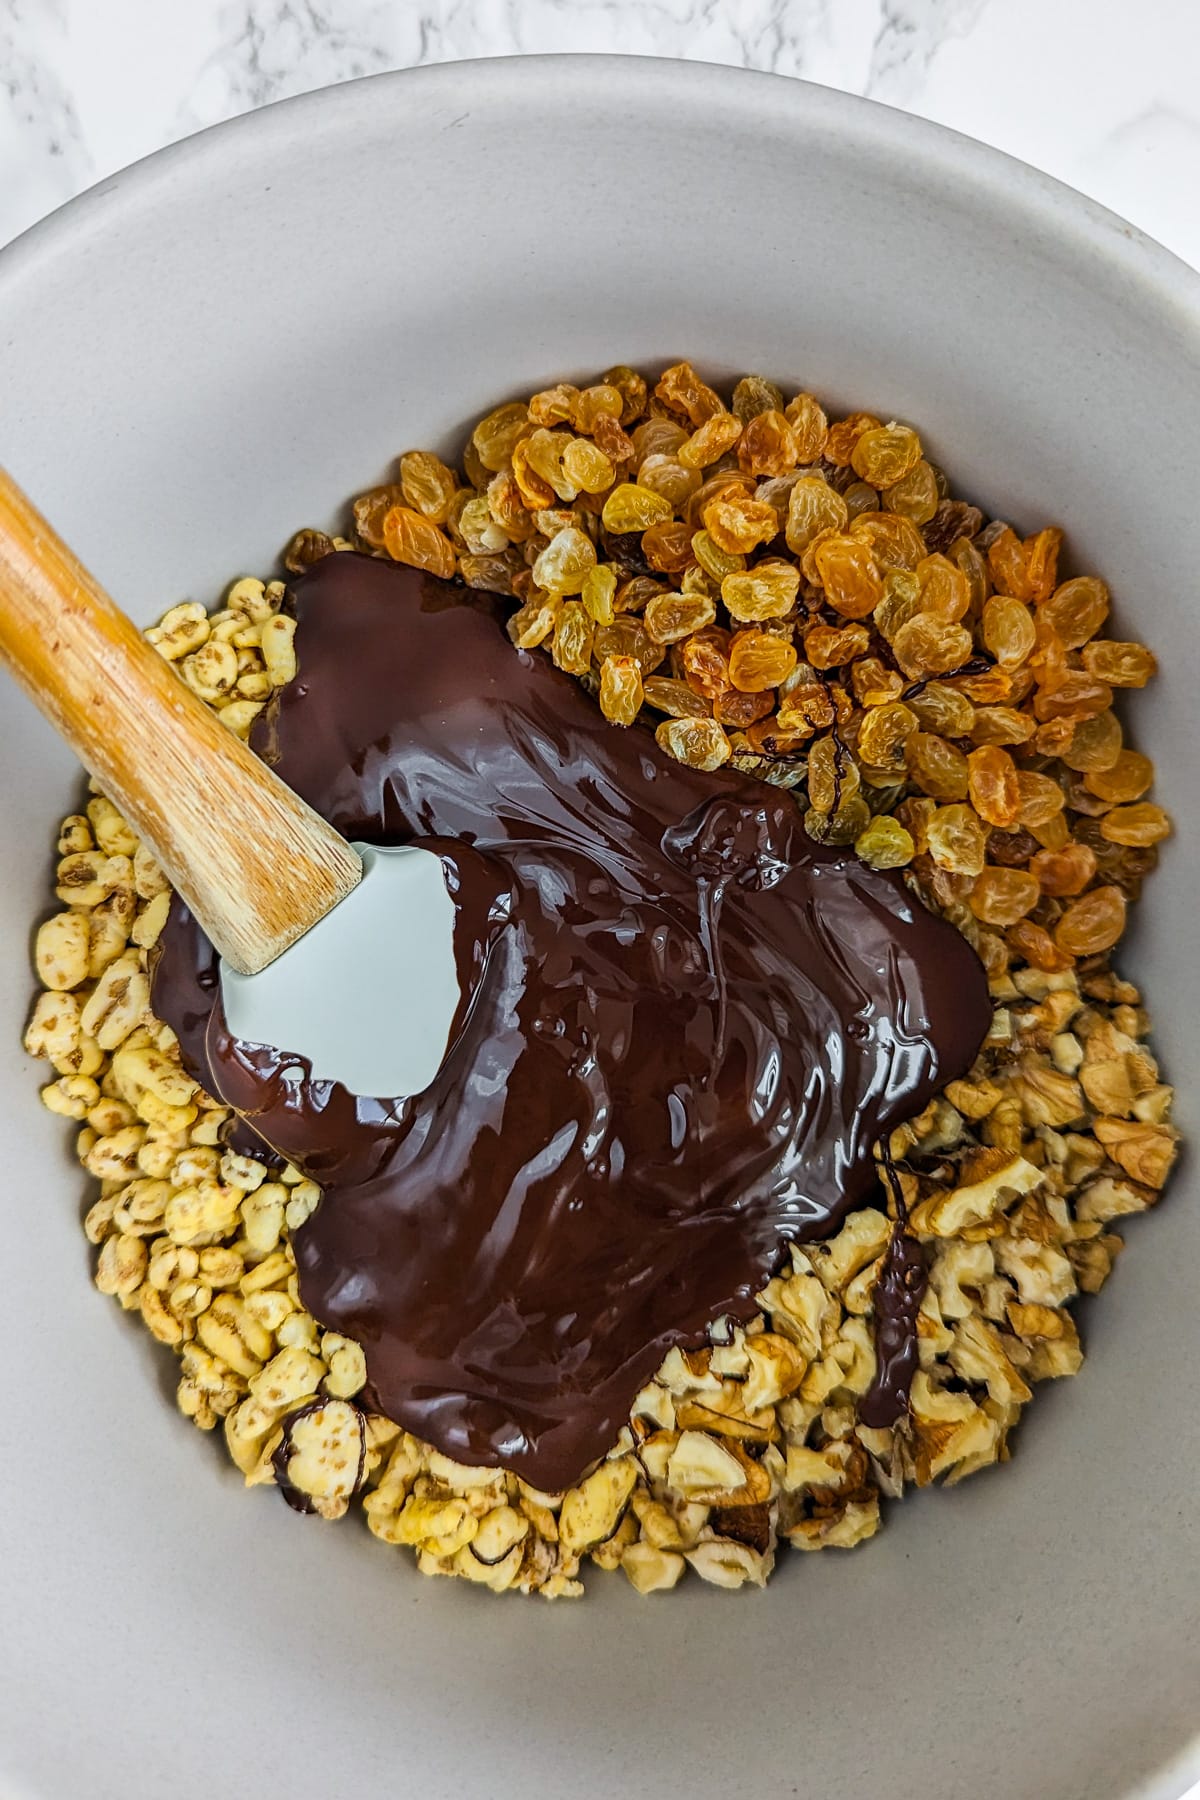 Large bowl with raisins, melted chocolate, walnuts and rice bubbles.